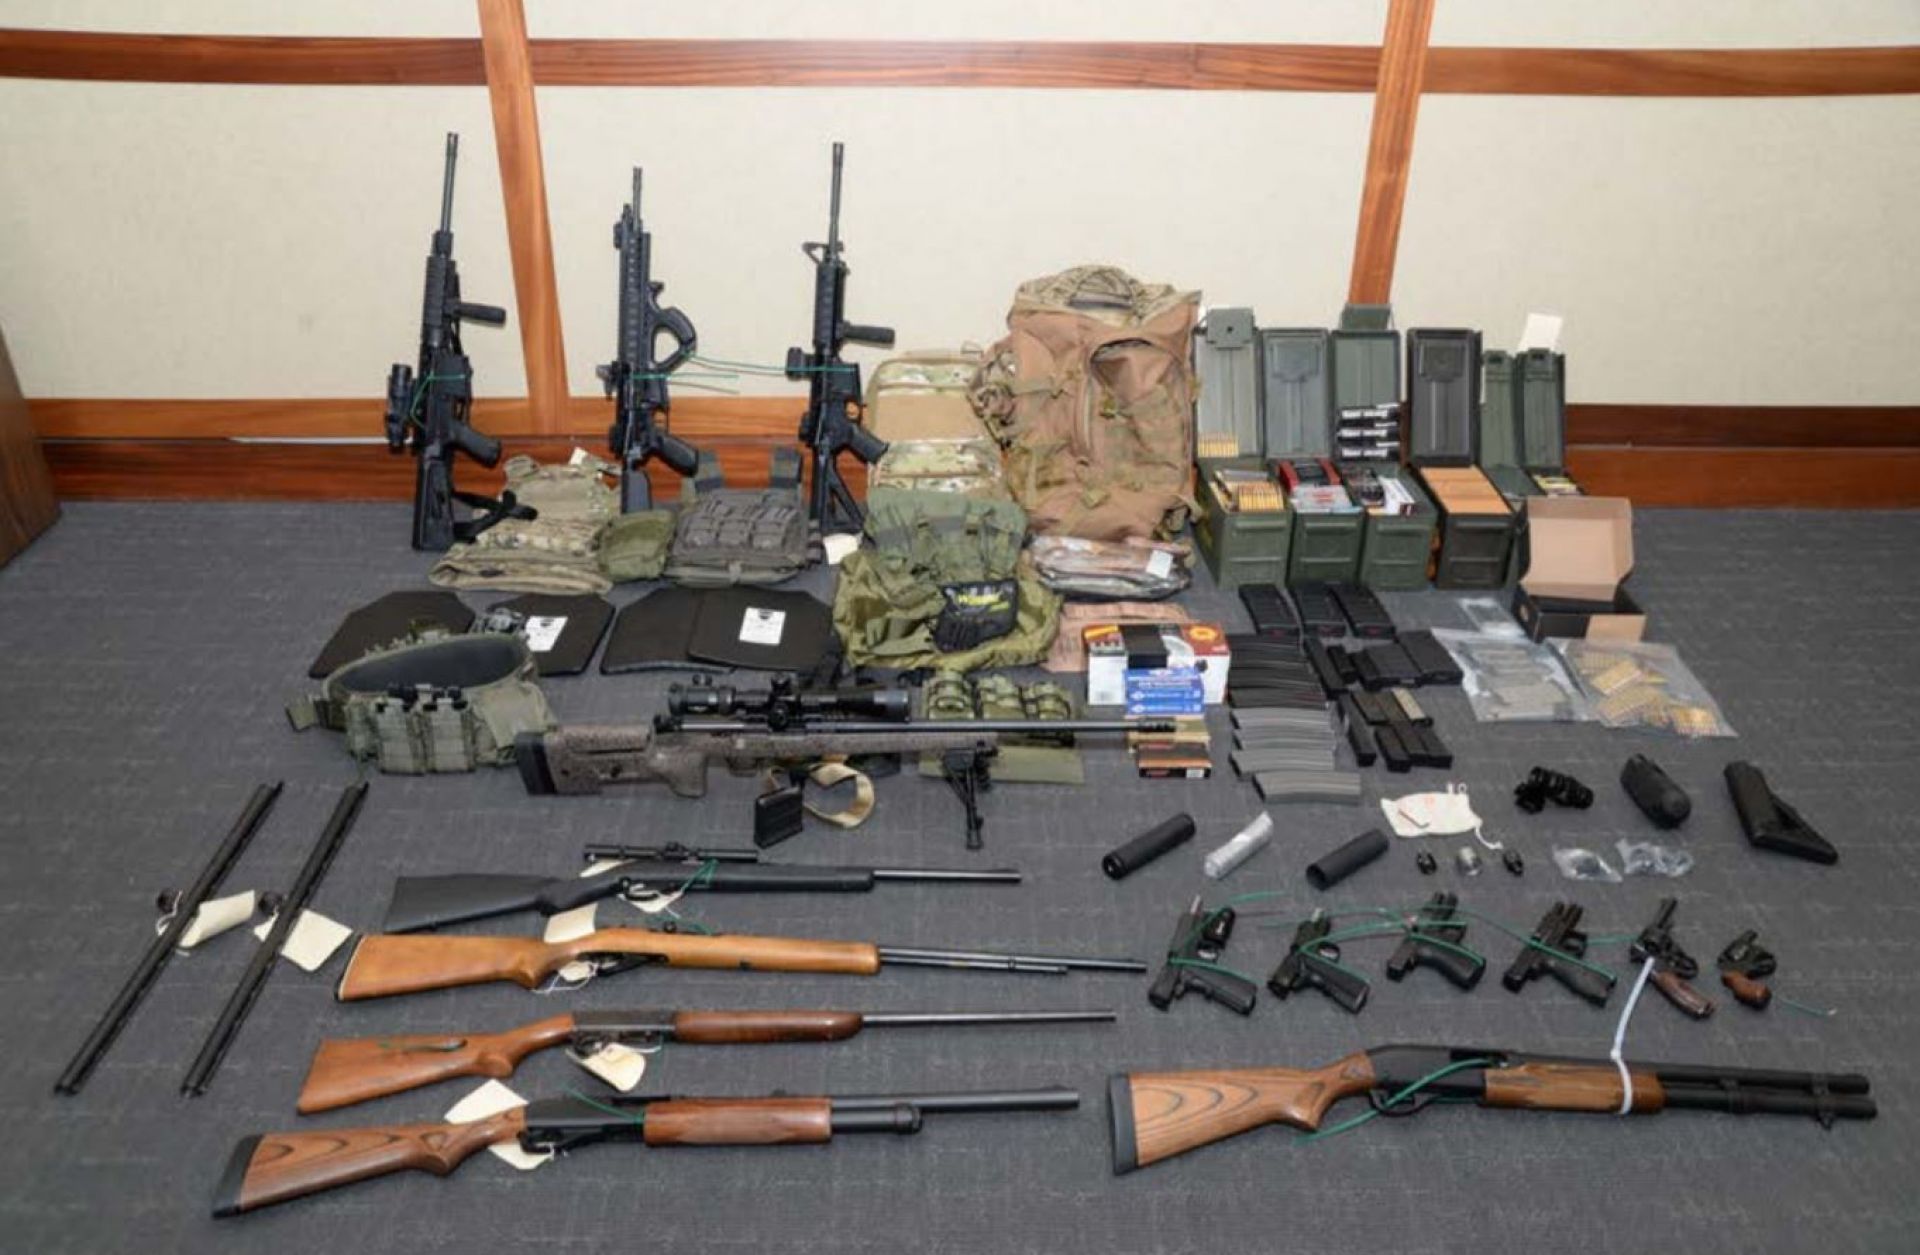 A collection of weapons and ammunition federal agents say they found in the apartment of a member of the U.S. Coast Guard accused of plotting a major terror attack against Americans.